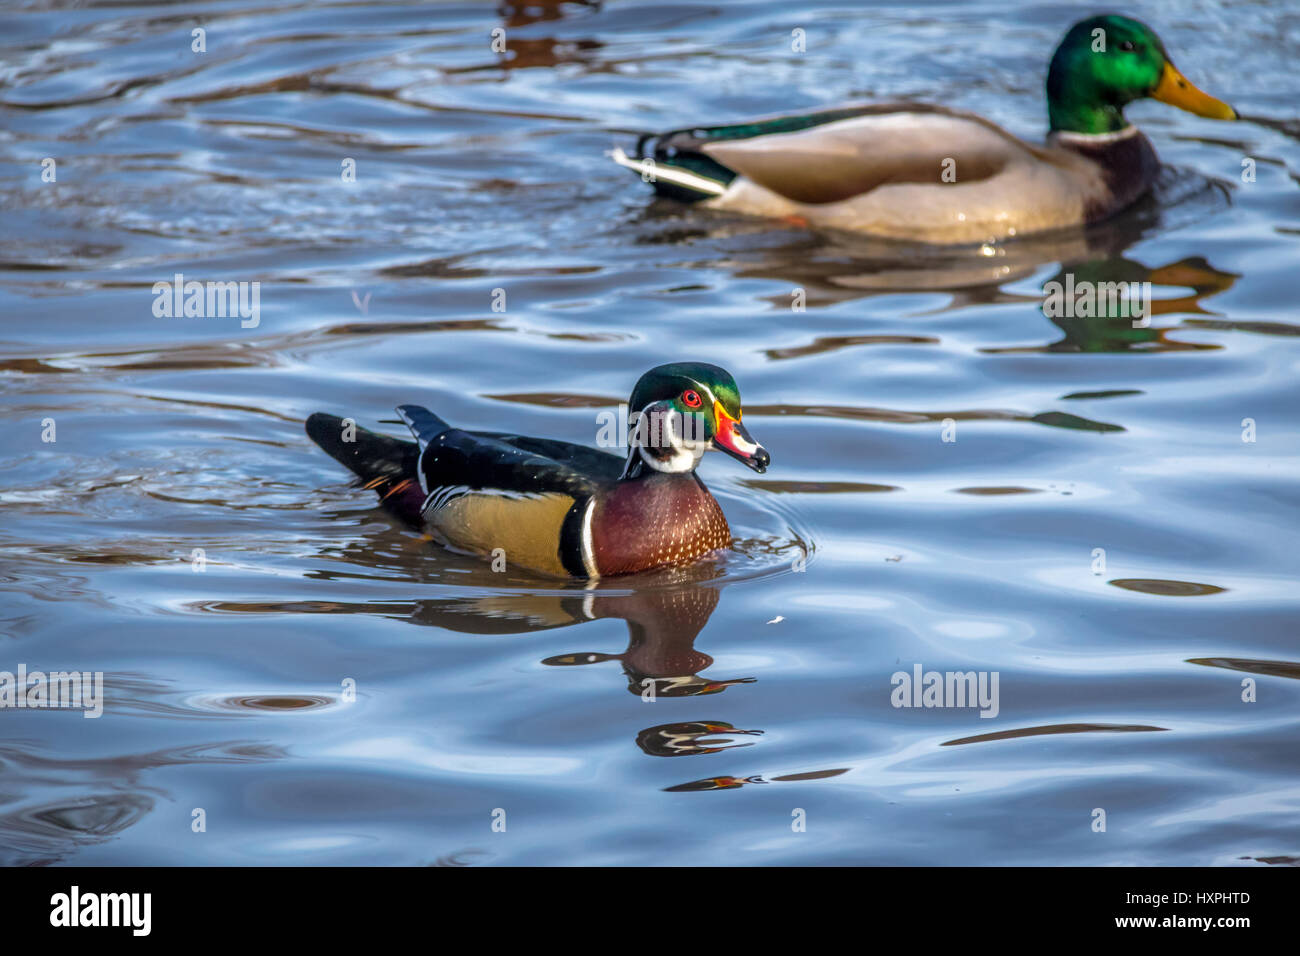 Male wood duck swimming in a pond of High Park - Toronto, Ontario, Canada Stock Photo